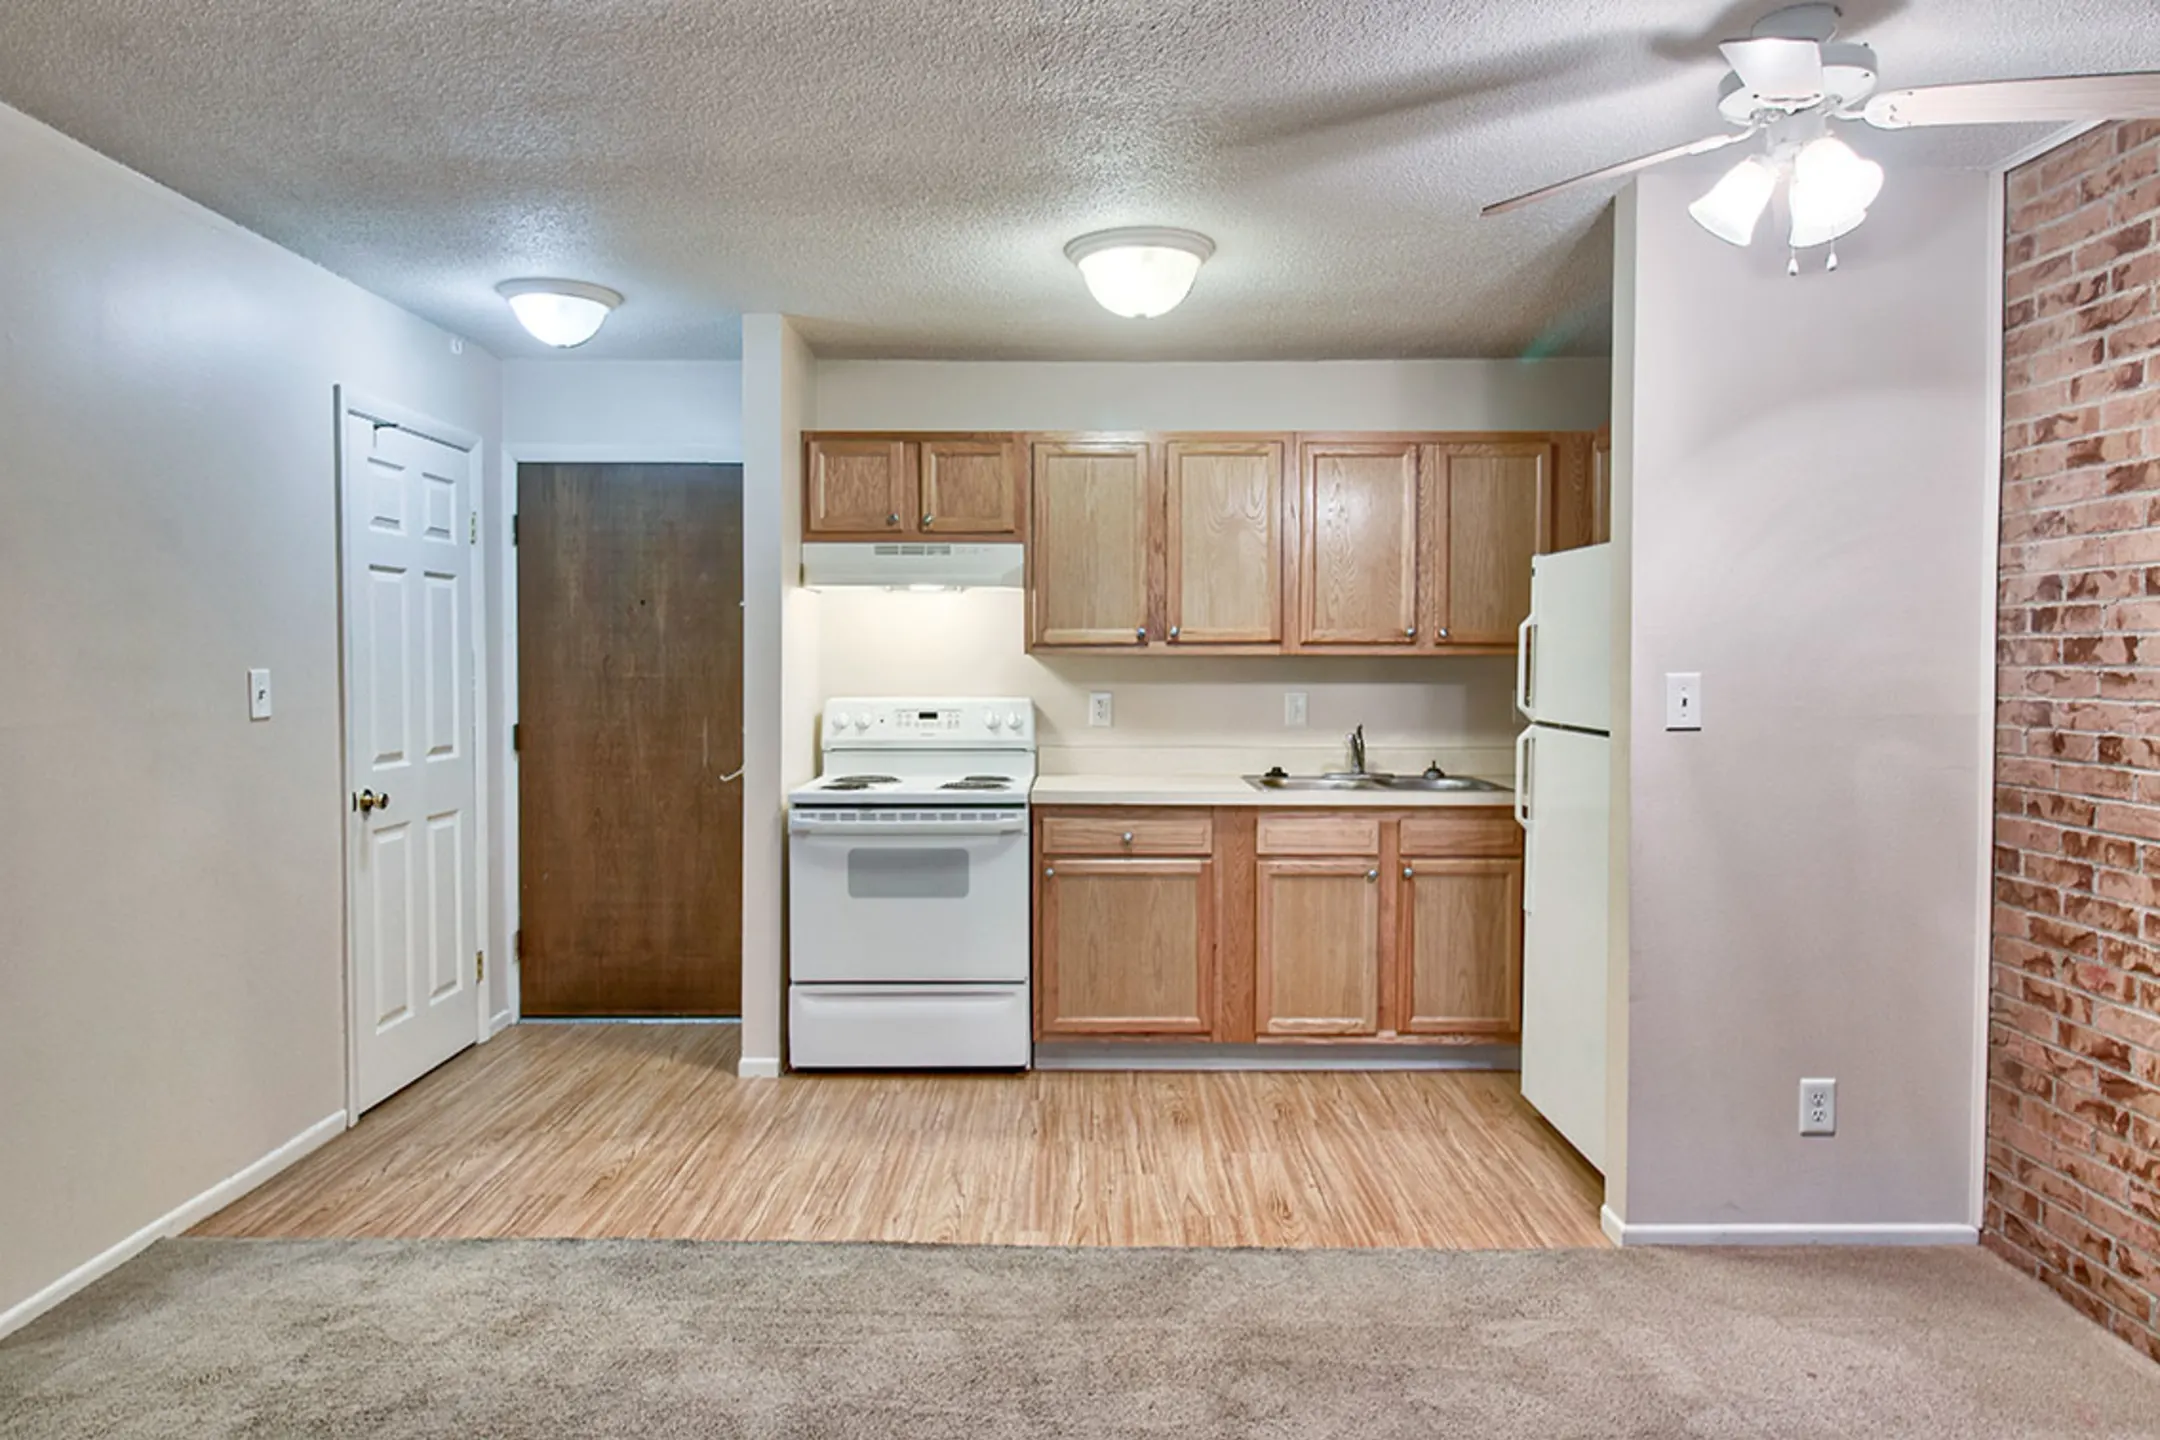 Kitchen - Mapleview Colony Terrace Family and Senior Living - Zanesville, OH